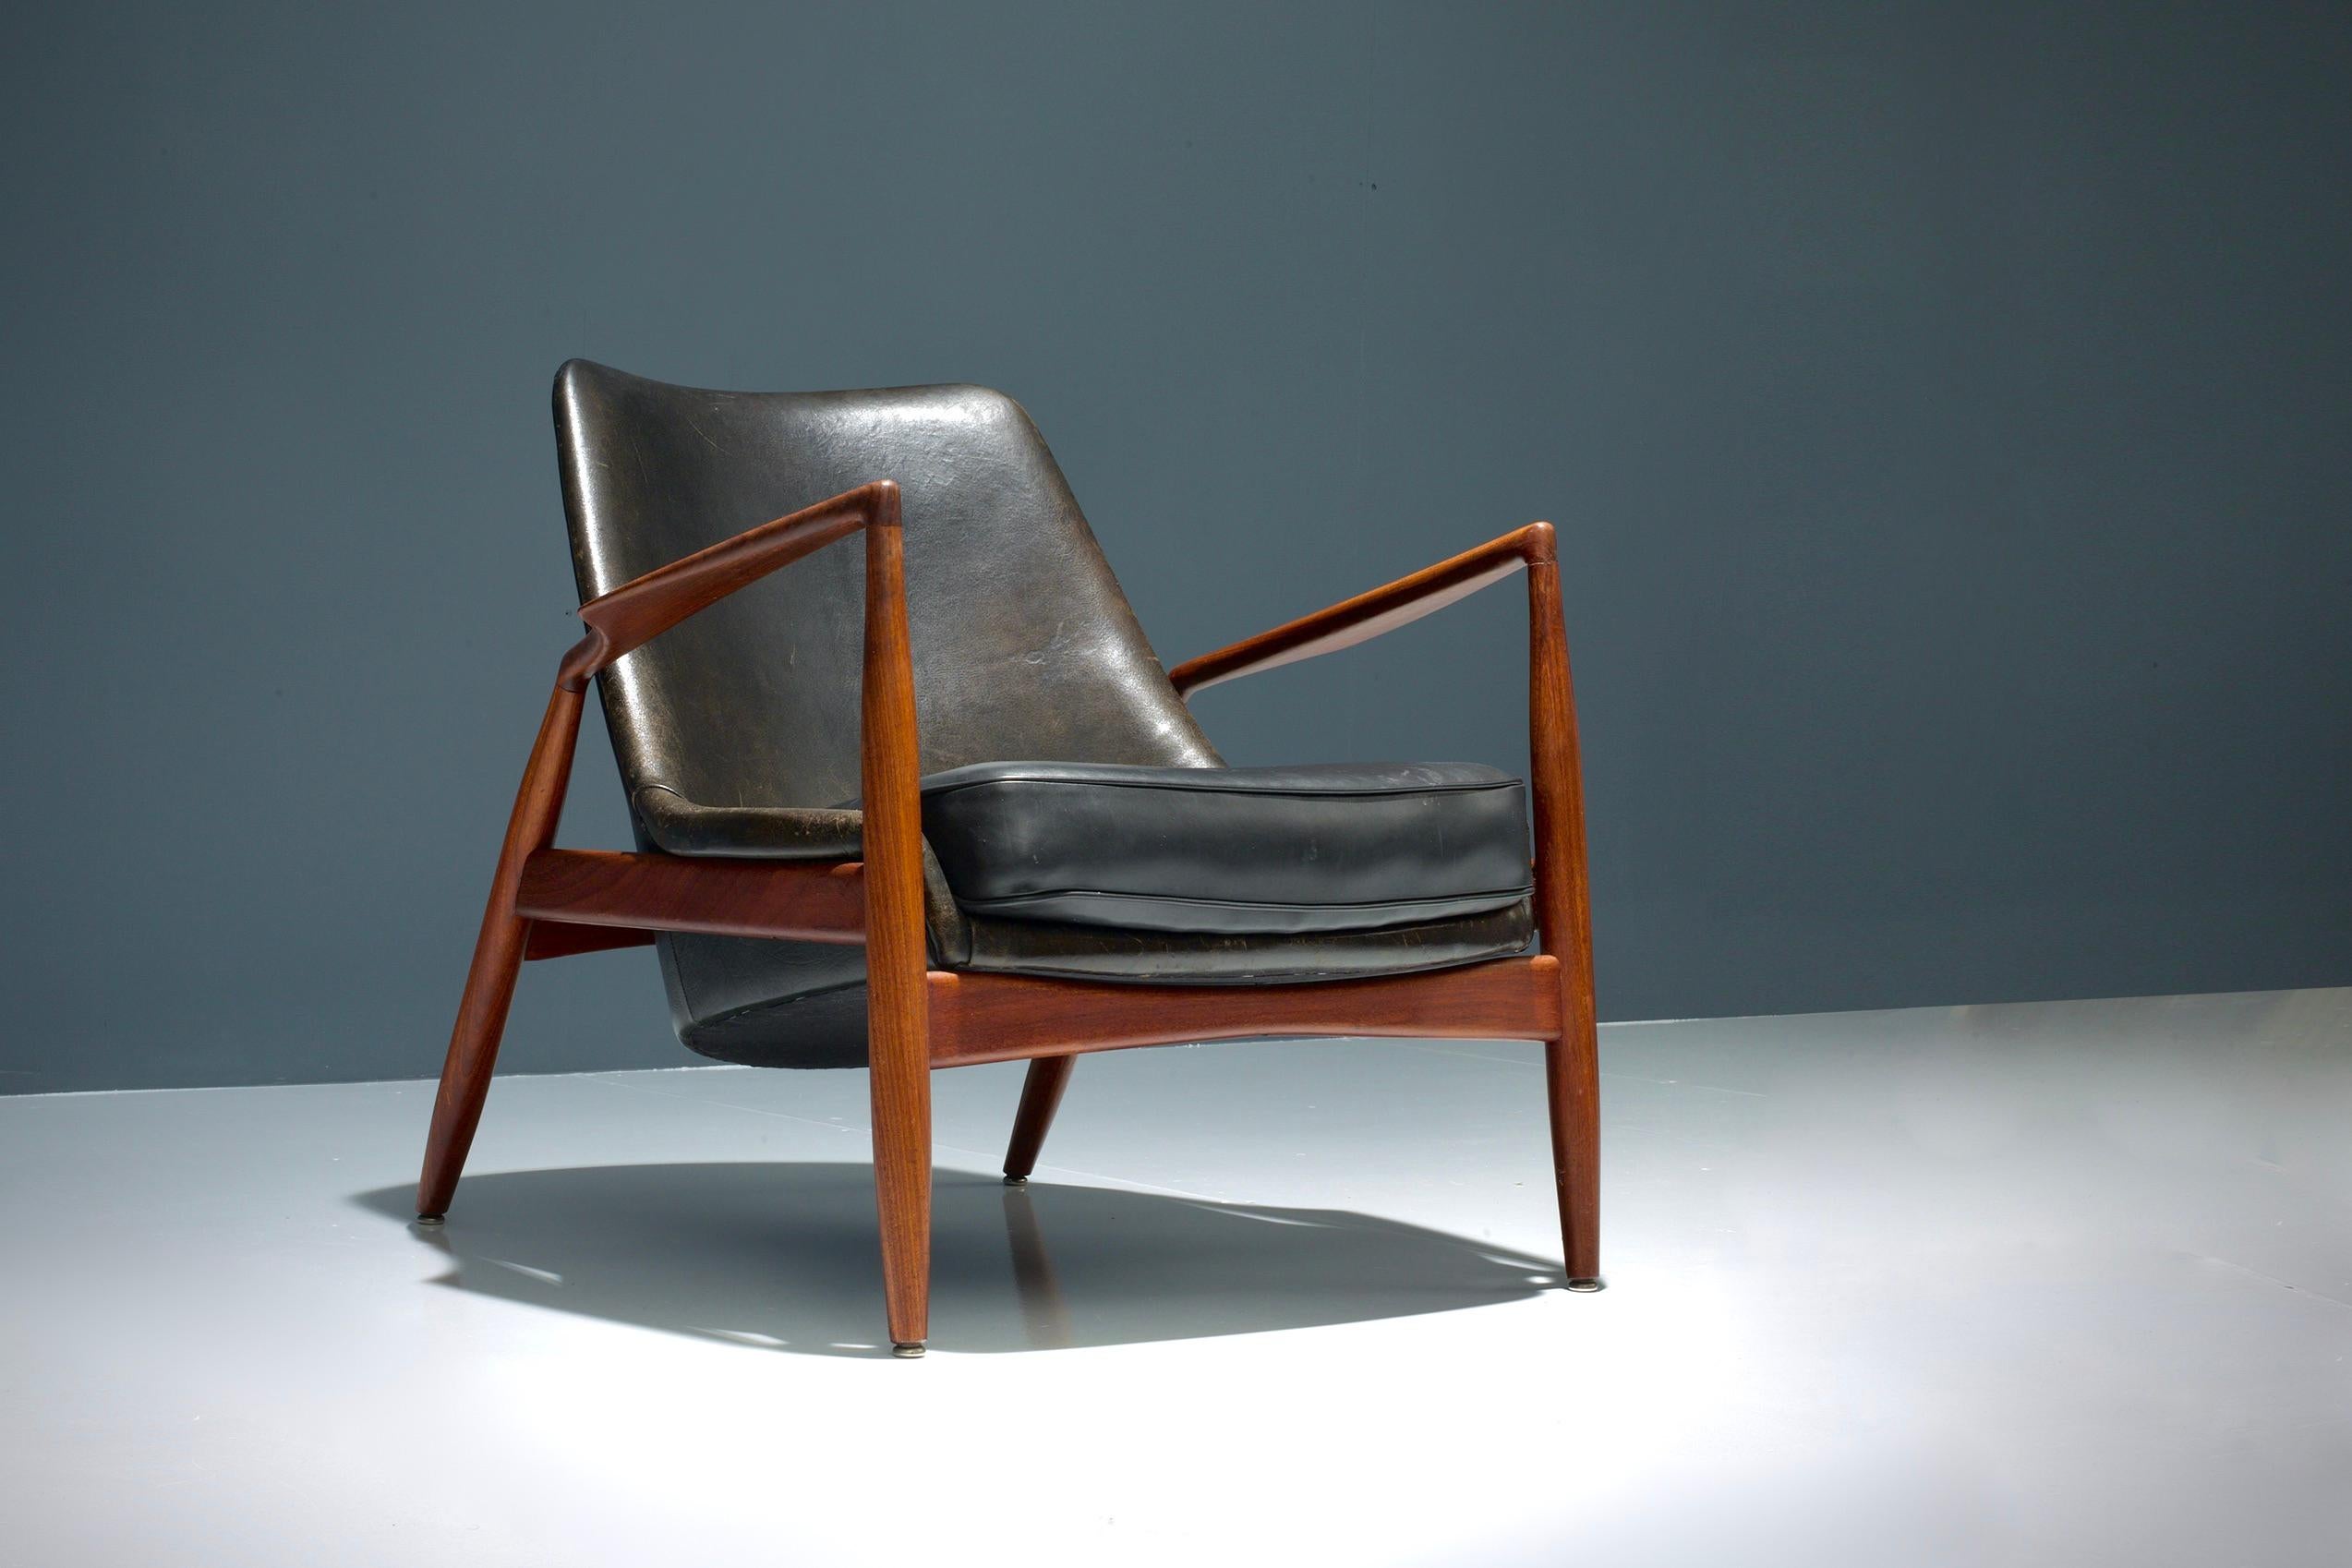 This famous lounge chair is called 'Sa¨len' or 'Seal' and is designed by the well known Danish designer Ib Kofod-Larsen. It was produced in the fifties by the Swedish company O.P.E. 

The Seal is a very antropomorph piece of furniture: the